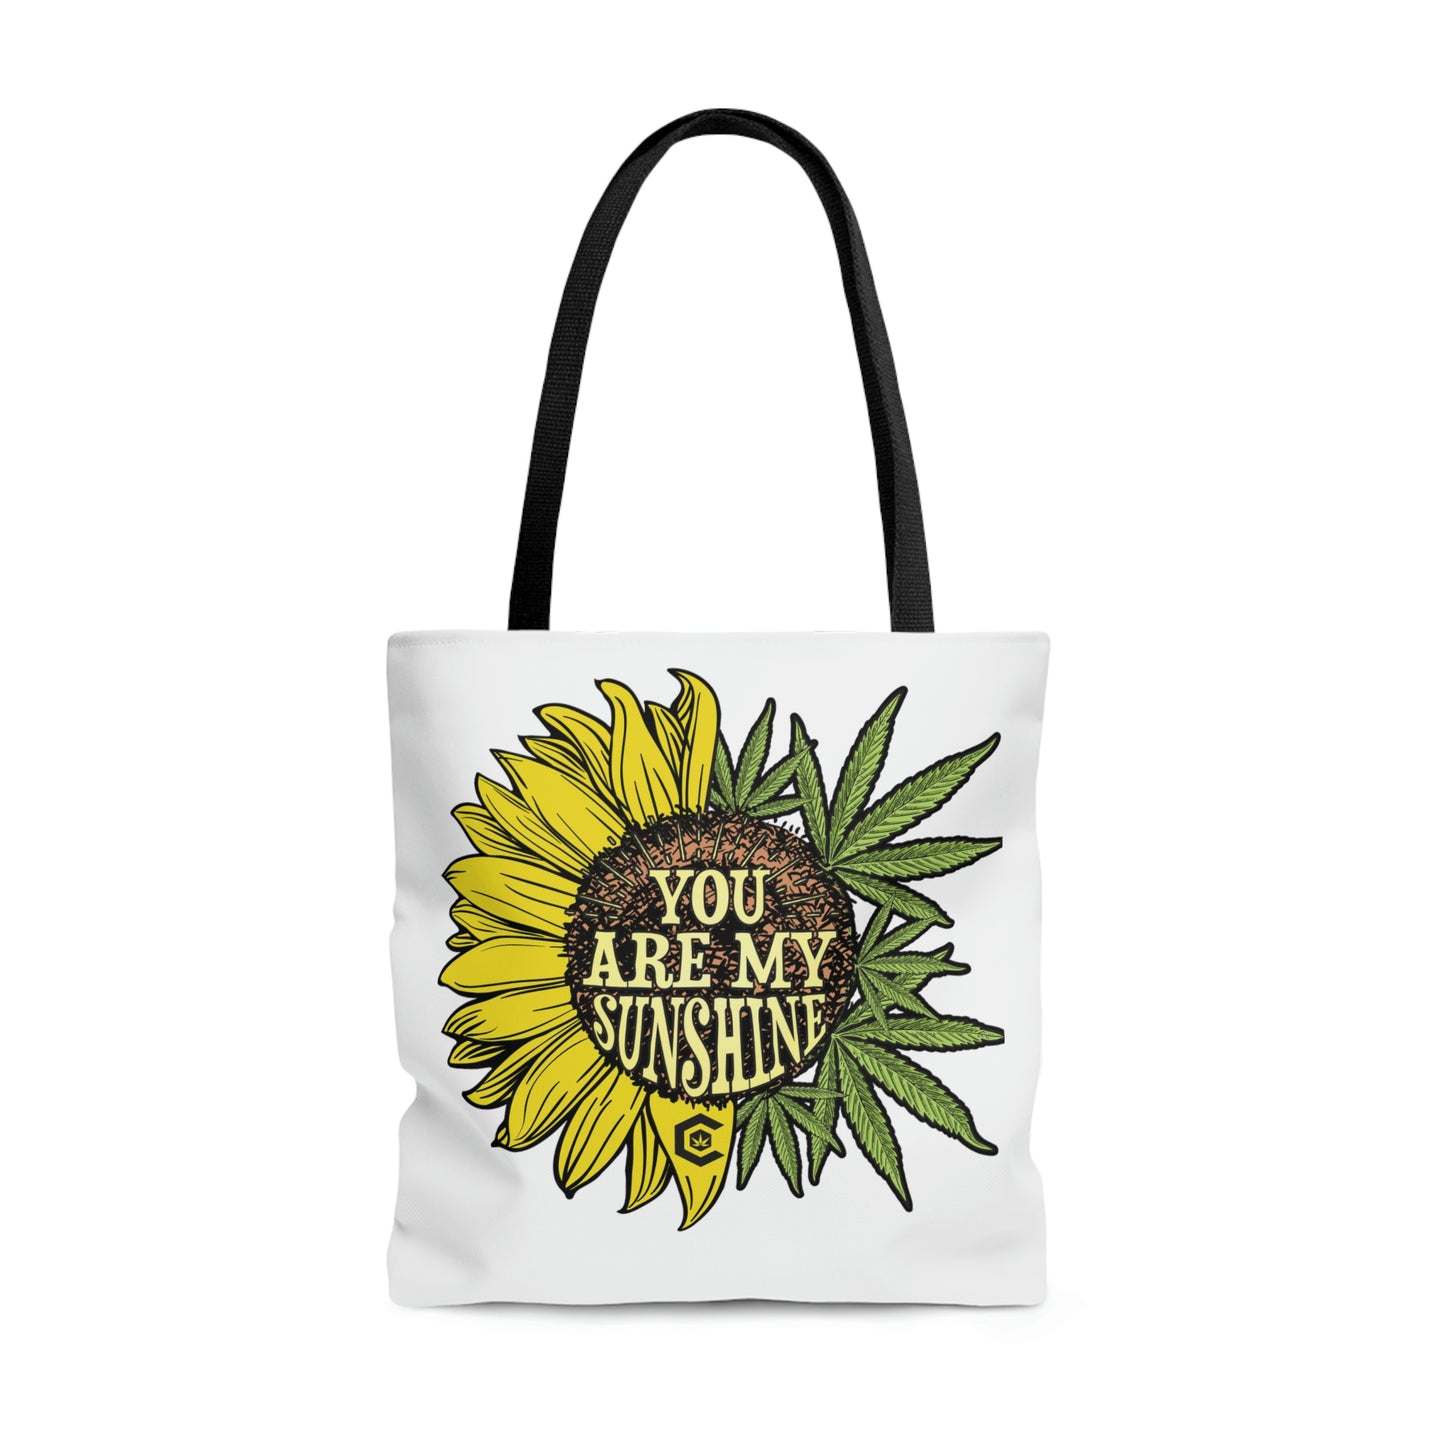 Nicely decorated You Are My Sunshine Marijuana Tote Bag with cool graphics of a sunflower and ganja leaves intertwined together